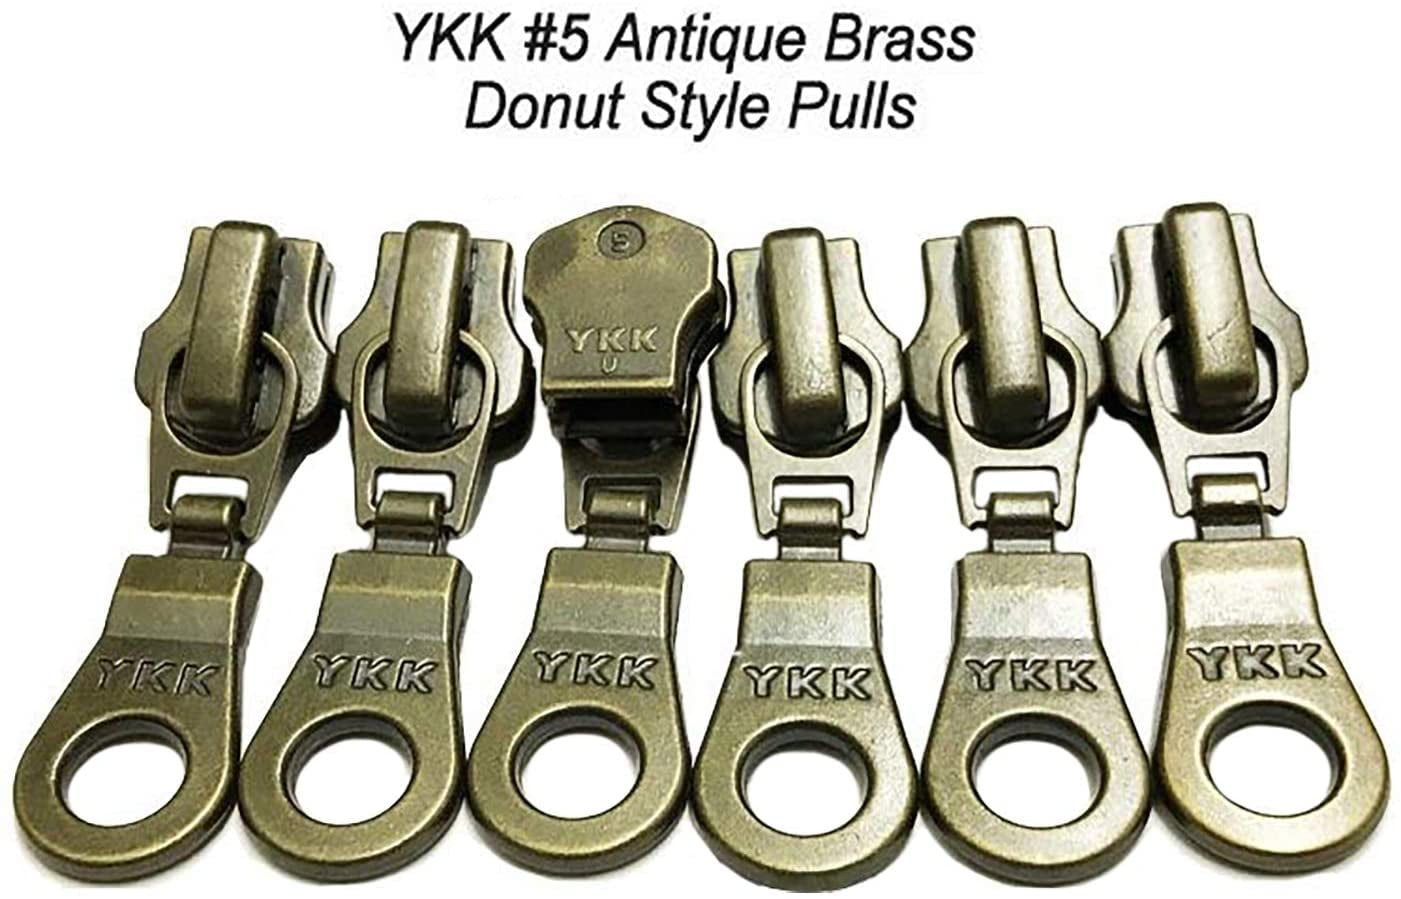 YKK Zipper Repair Kit Solution 5 Zipper Heads - Sliders with Pulls #5 Brand Donut Style Pulls - 5pcs with Top and Bottom Stoppers (Antique Brass)